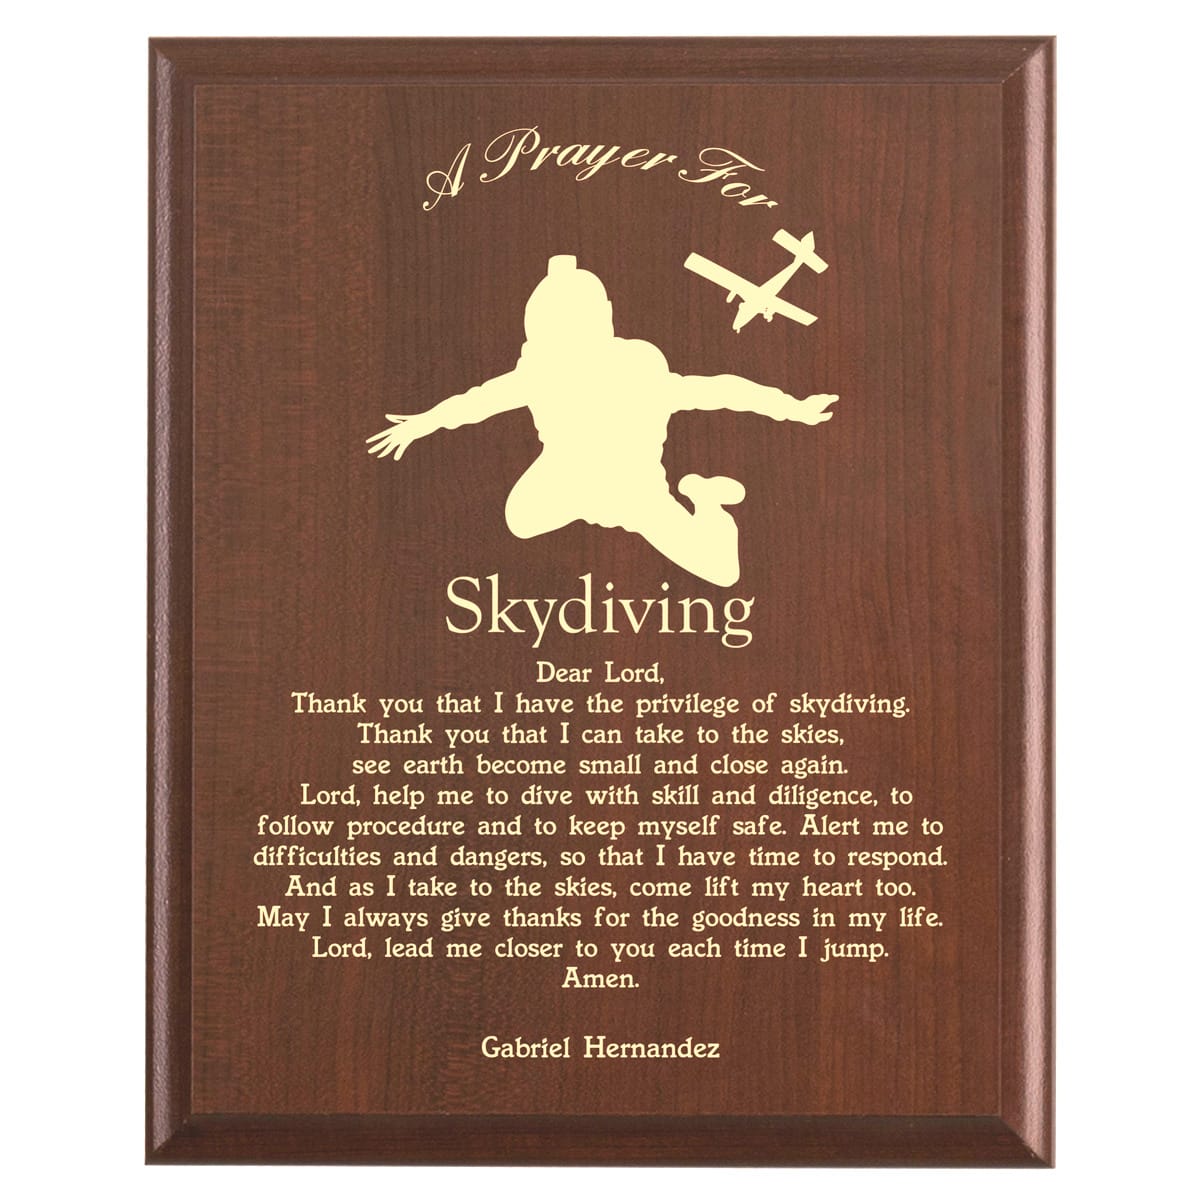 Plaque photo: Skydiving Prayer Plaque design with free personalization. Wood style finish with customized text.